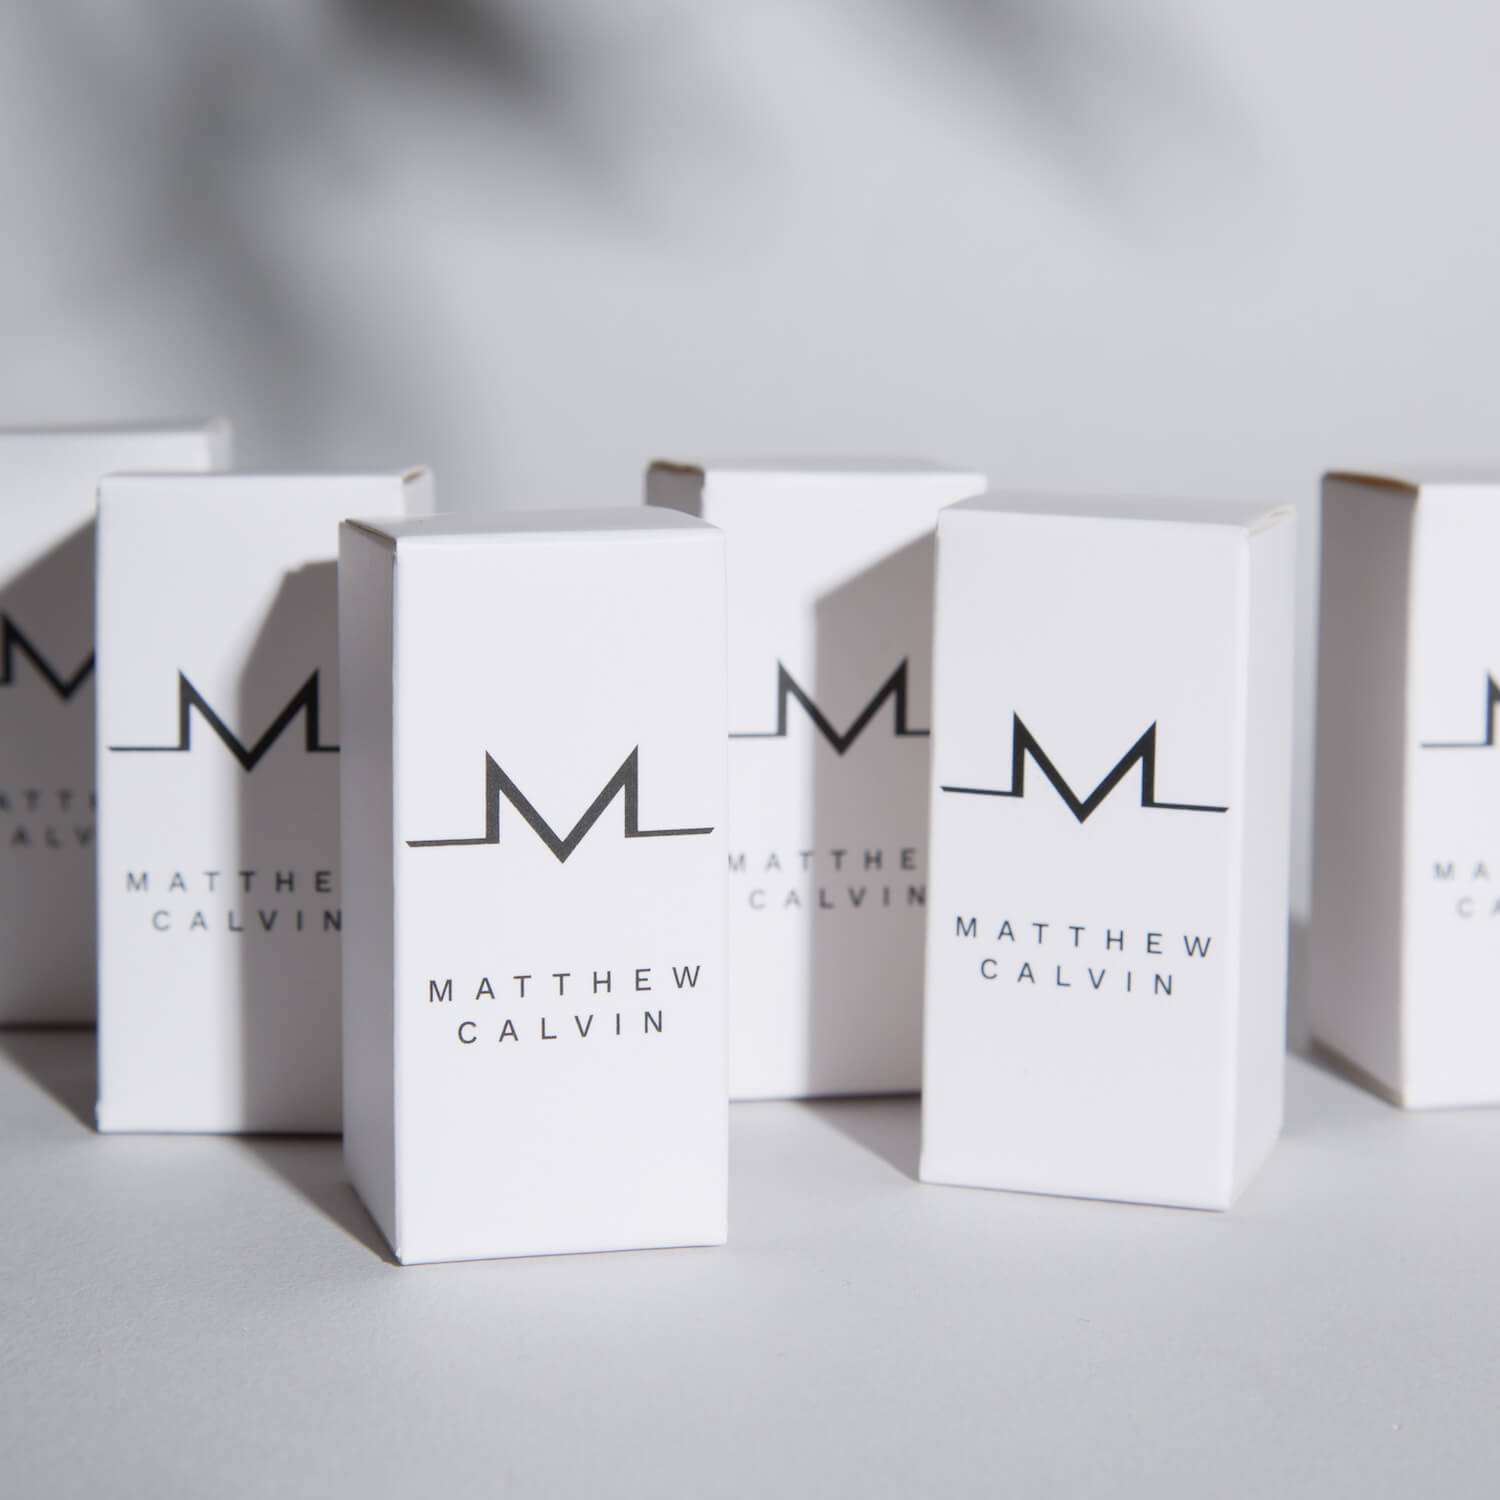 White jewellery boxes for stud earrings made by Matthew Calvin